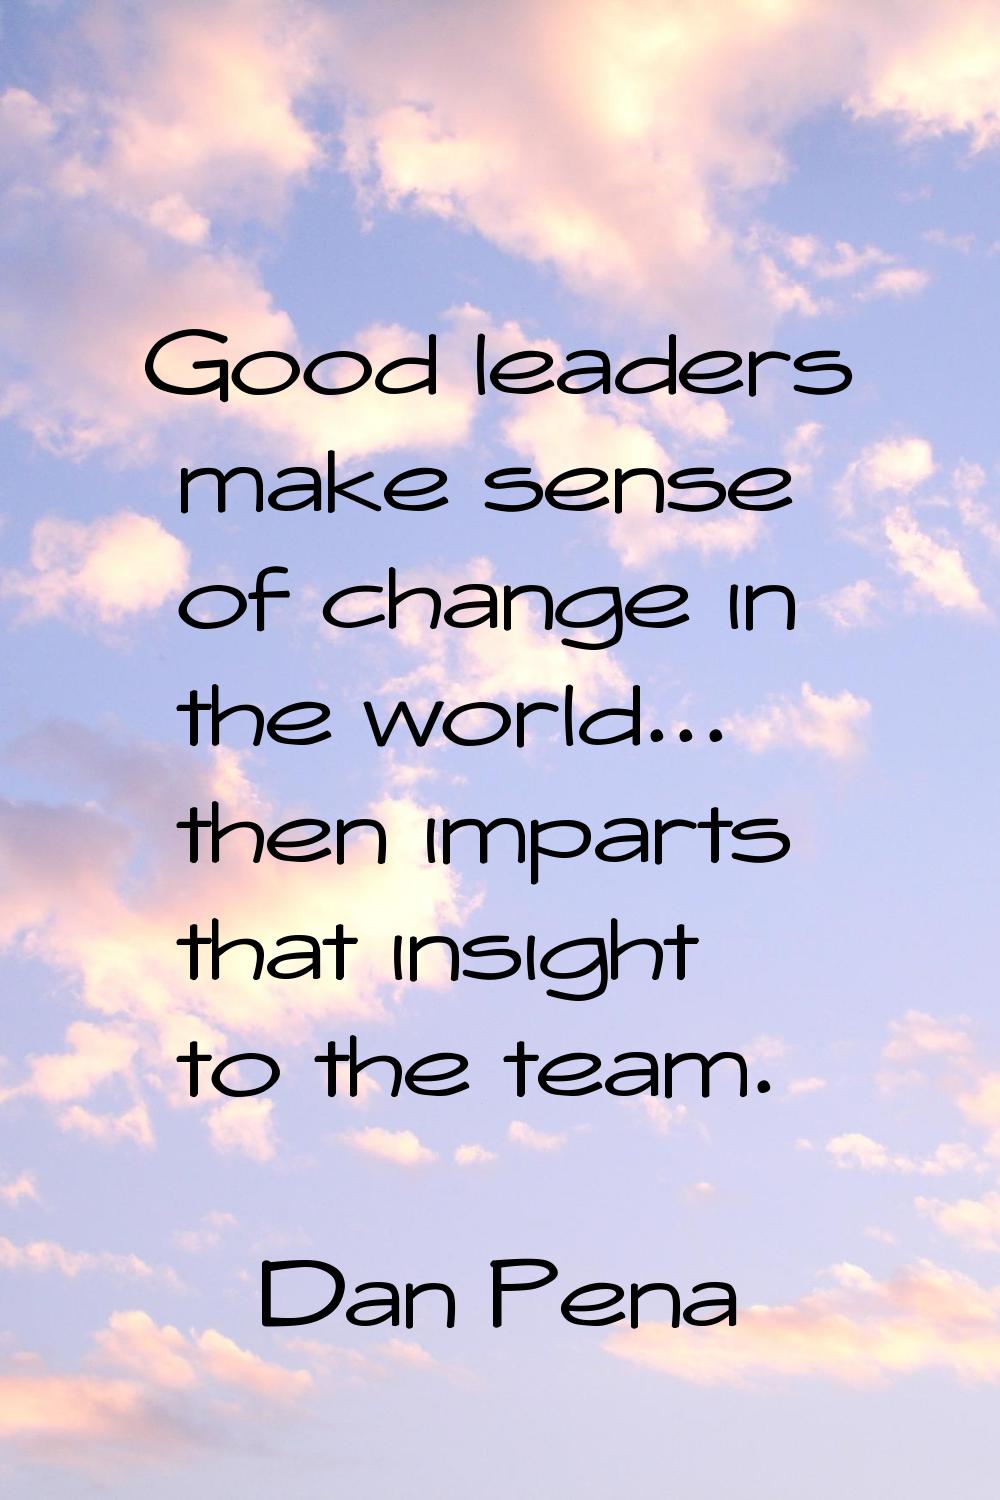 Good leaders make sense of change in the world... then imparts that insight to the team.